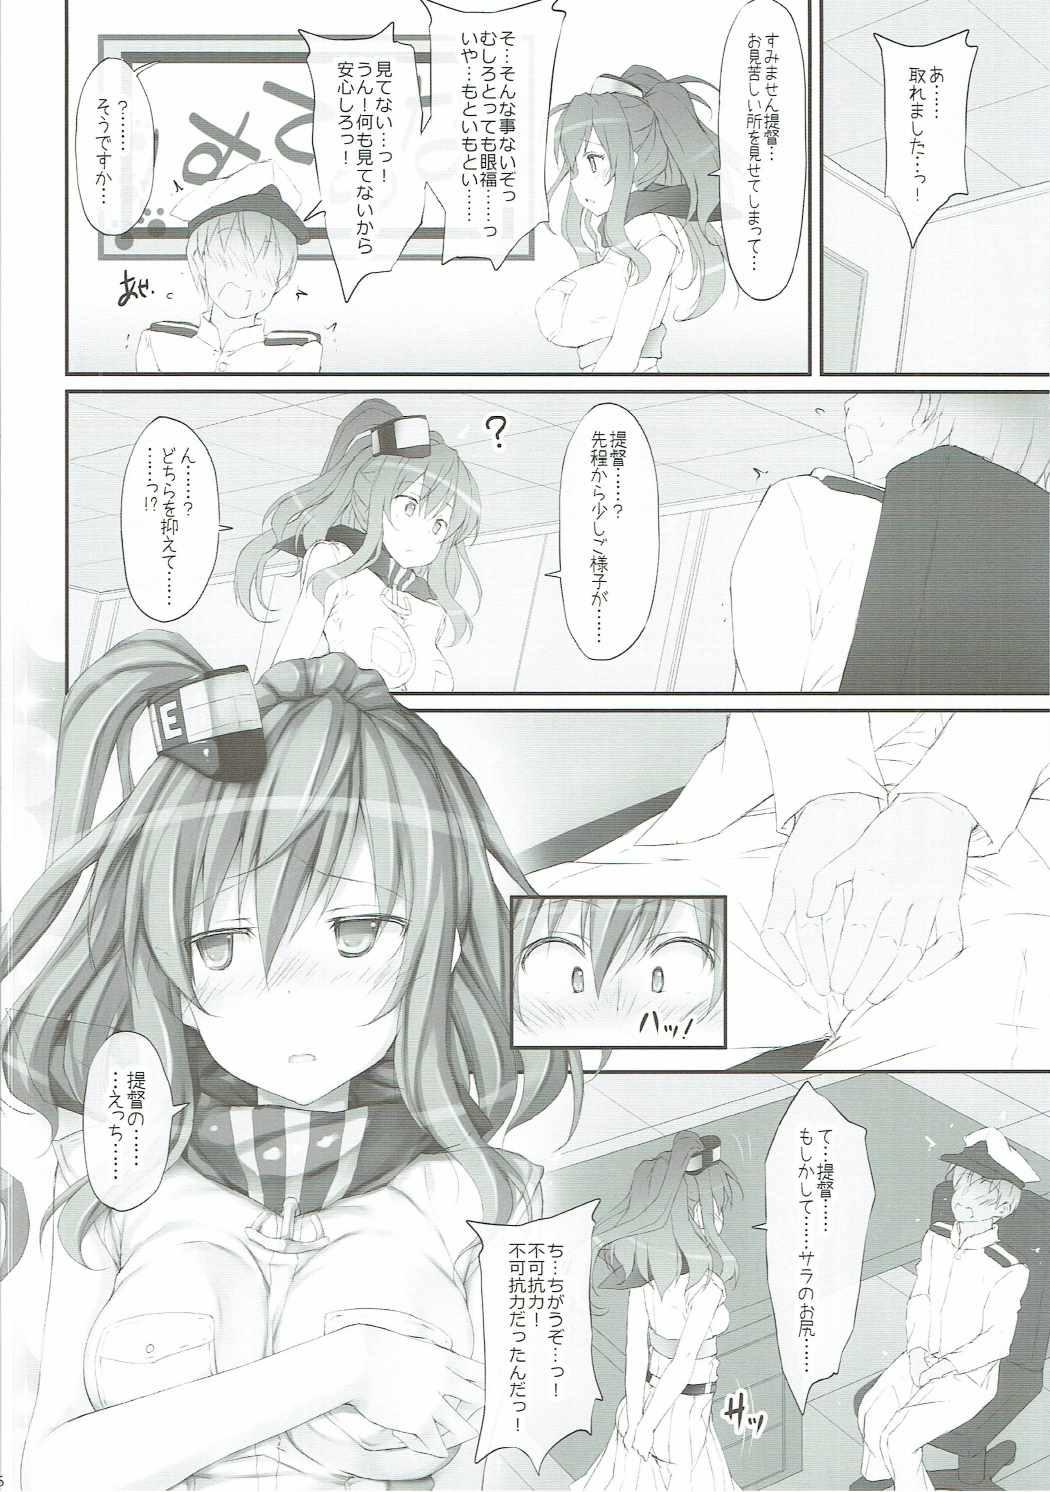 Gostosa SSR - Kantai collection Riding - Page 5